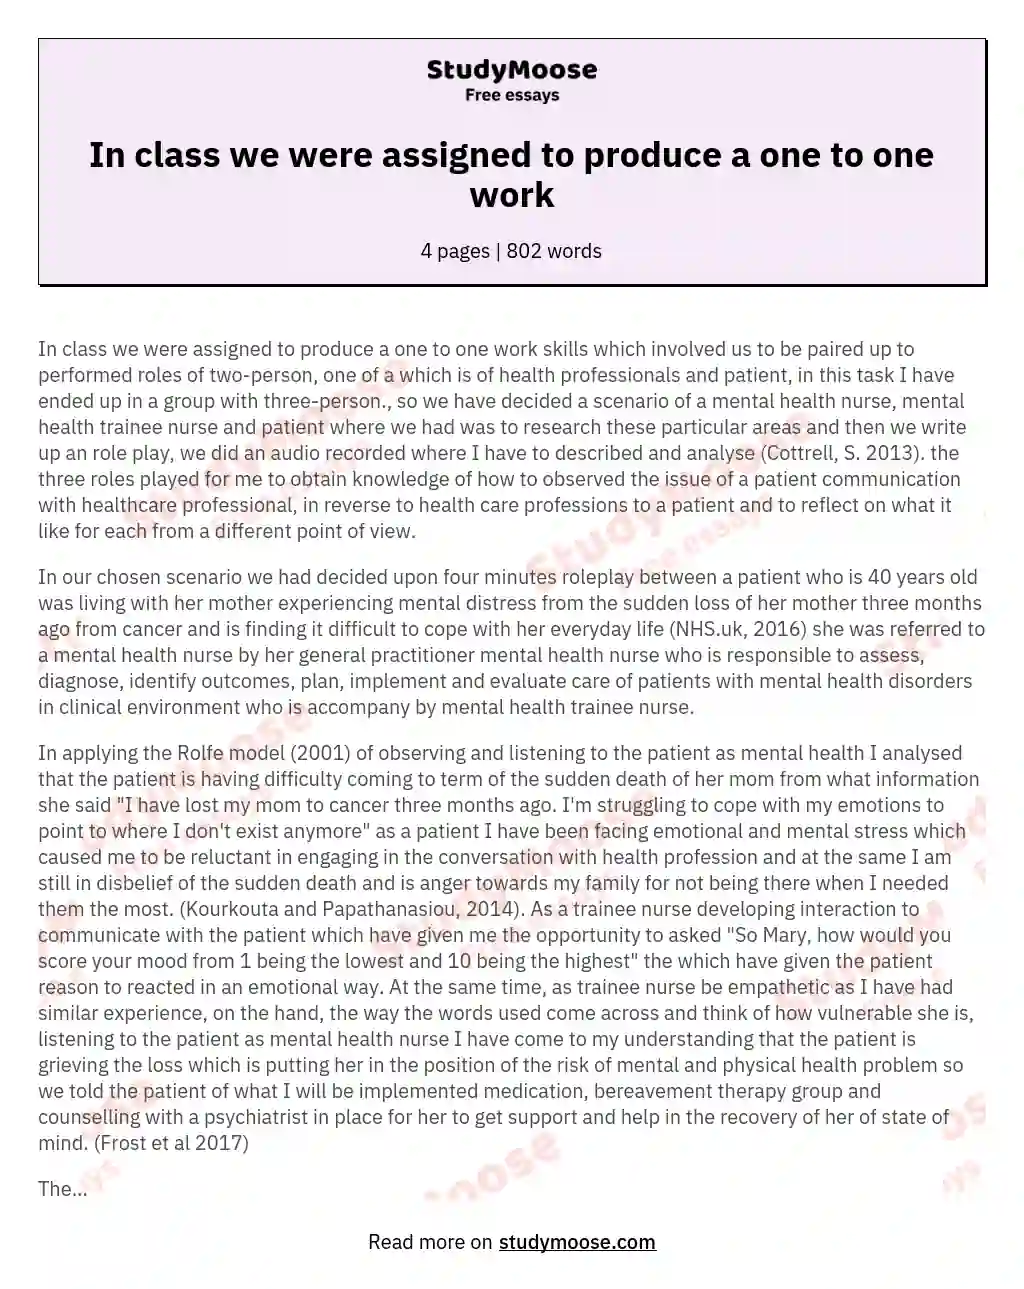 In class we were assigned to produce a one to one work essay